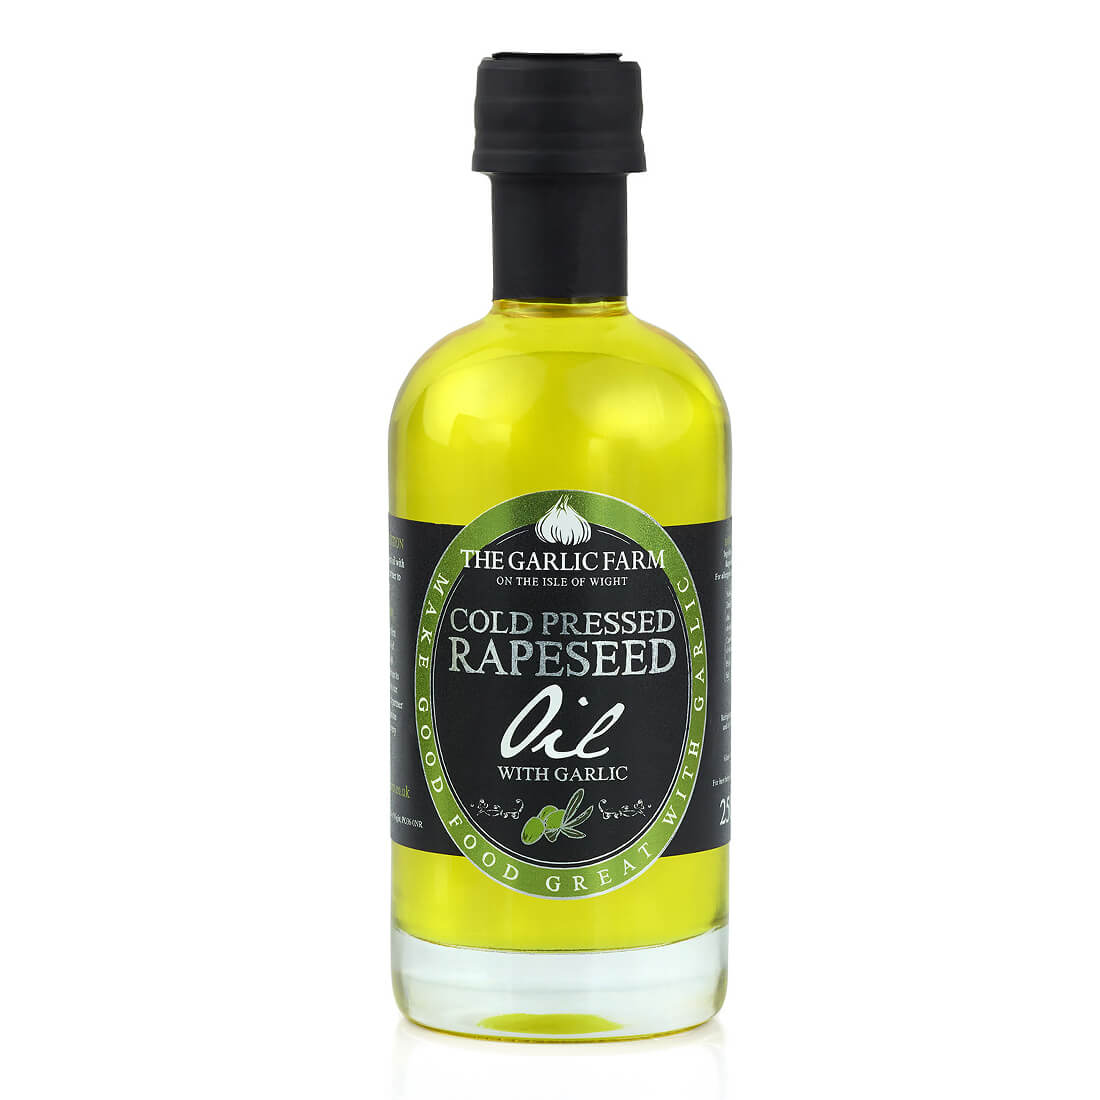 Image of Rapeseed Oil with Garlic made in the UK by The Garlic Farm. Buying this product supports a UK business, jobs and the local community